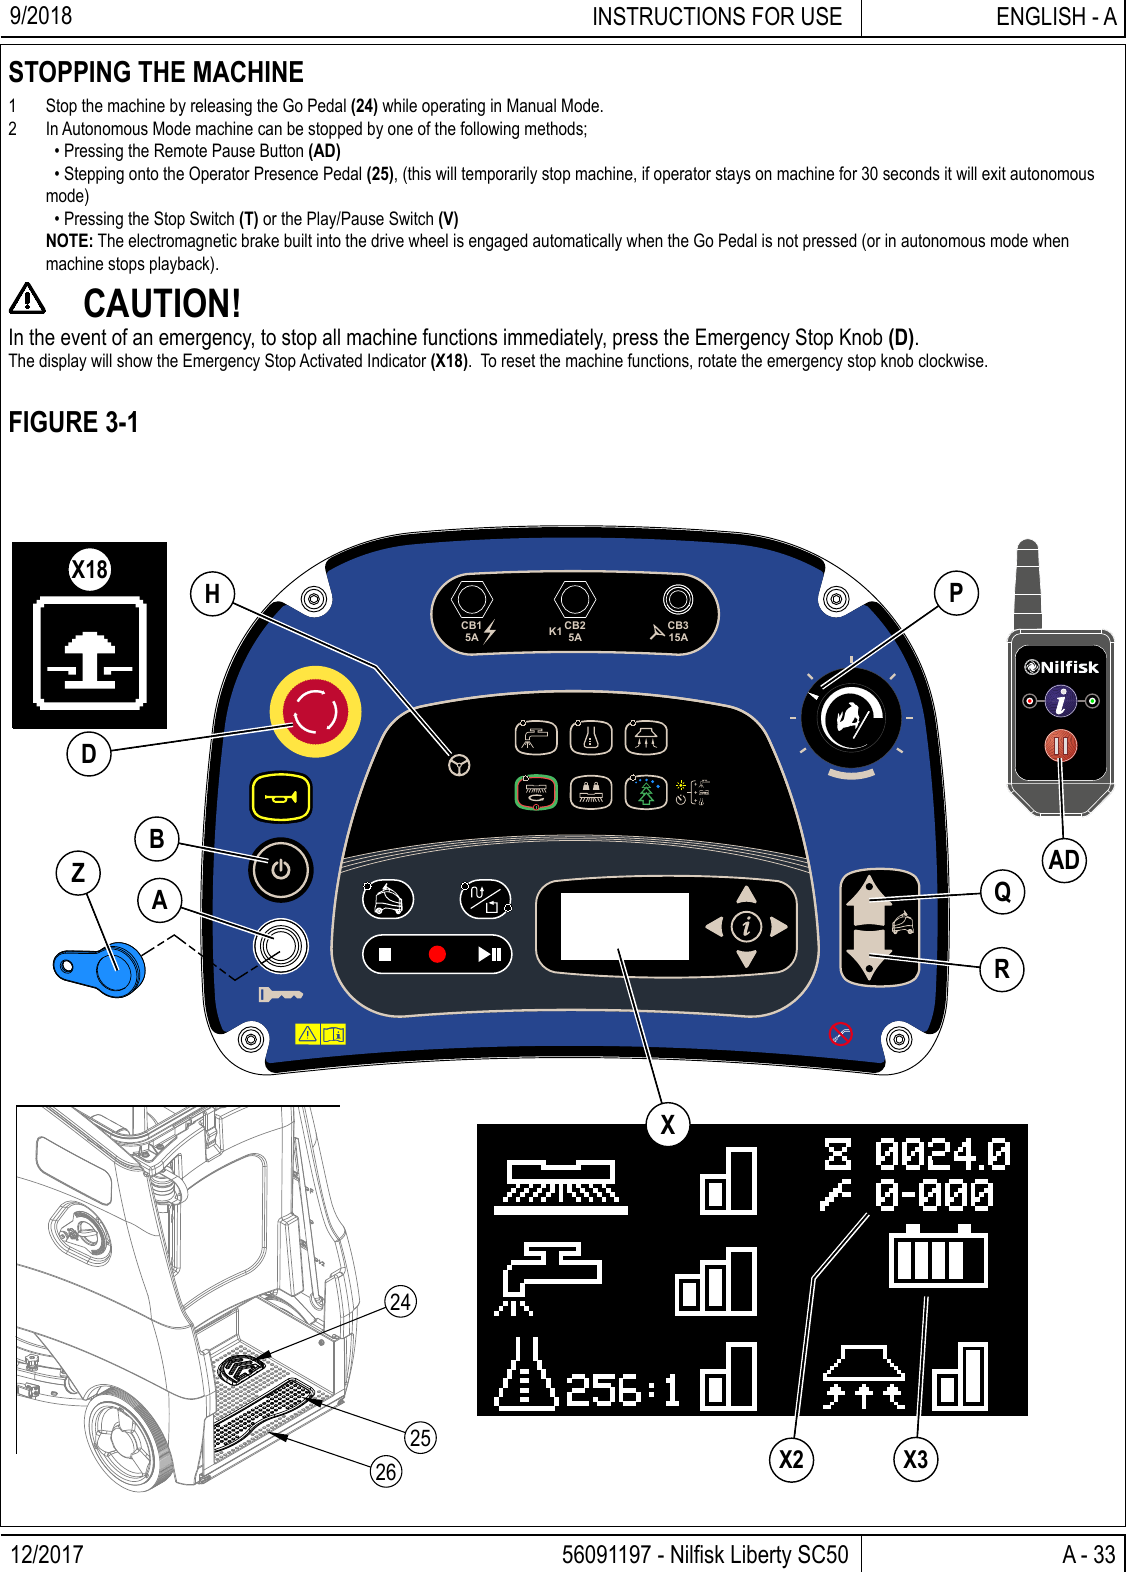 12/2017 A - 33 56091197 - Nilﬁ sk Liberty SC50ENGLISH - AINSTRUCTIONS FOR USE9/2018STOPPING THE MACHINE1  Stop the machine by releasing the Go Pedal (24) while operating in Manual Mode.2  In Autonomous Mode machine can be stopped by one of the following methods;    • Pressing the Remote Pause Button (AD)    • Stepping onto the Operator Presence Pedal (25), (this will temporarily stop machine, if operator stays on machine for 30 seconds it will exit autonomous mode)    • Pressing the Stop Switch (T) or the Play/Pause Switch (V) NOTE: The electromagnetic brake built into the drive wheel is engaged automatically when the Go Pedal is not pressed (or in autonomous mode when machine stops playback). CAUTION!In the event of an emergency, to stop all machine functions immediately, press the Emergency Stop Knob (D).  The display will show the Emergency Stop Activated Indicator (X18).  To reset the machine functions, rotate the emergency stop knob clockwise.FIGURE 3-1242625 X3X2X18CB25ACB315ACB15A K1APBZQRXADDH